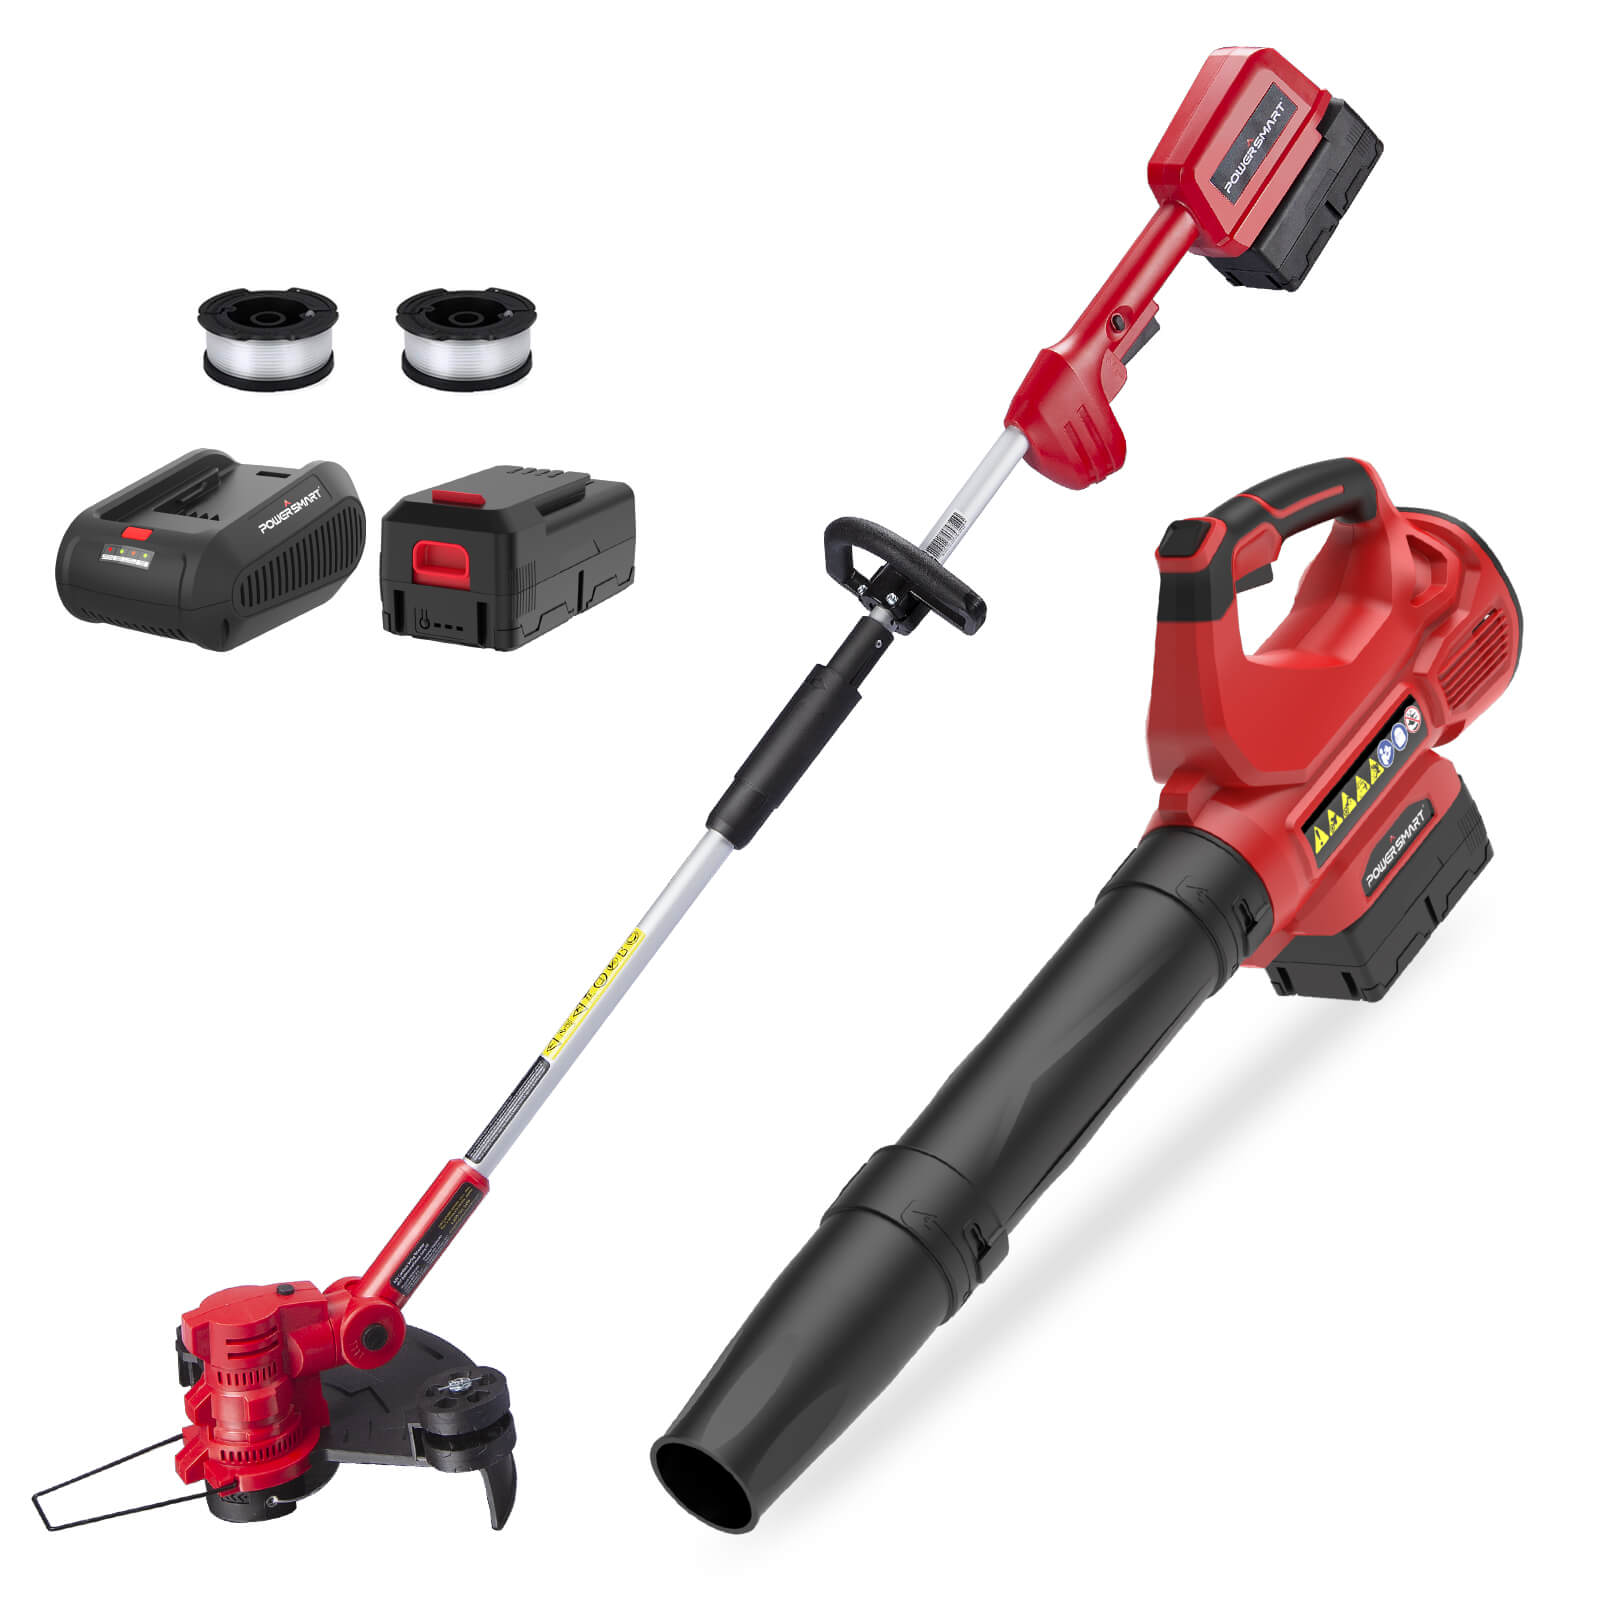 40V Max* String Trimmer, 13-Inch, Tool Only